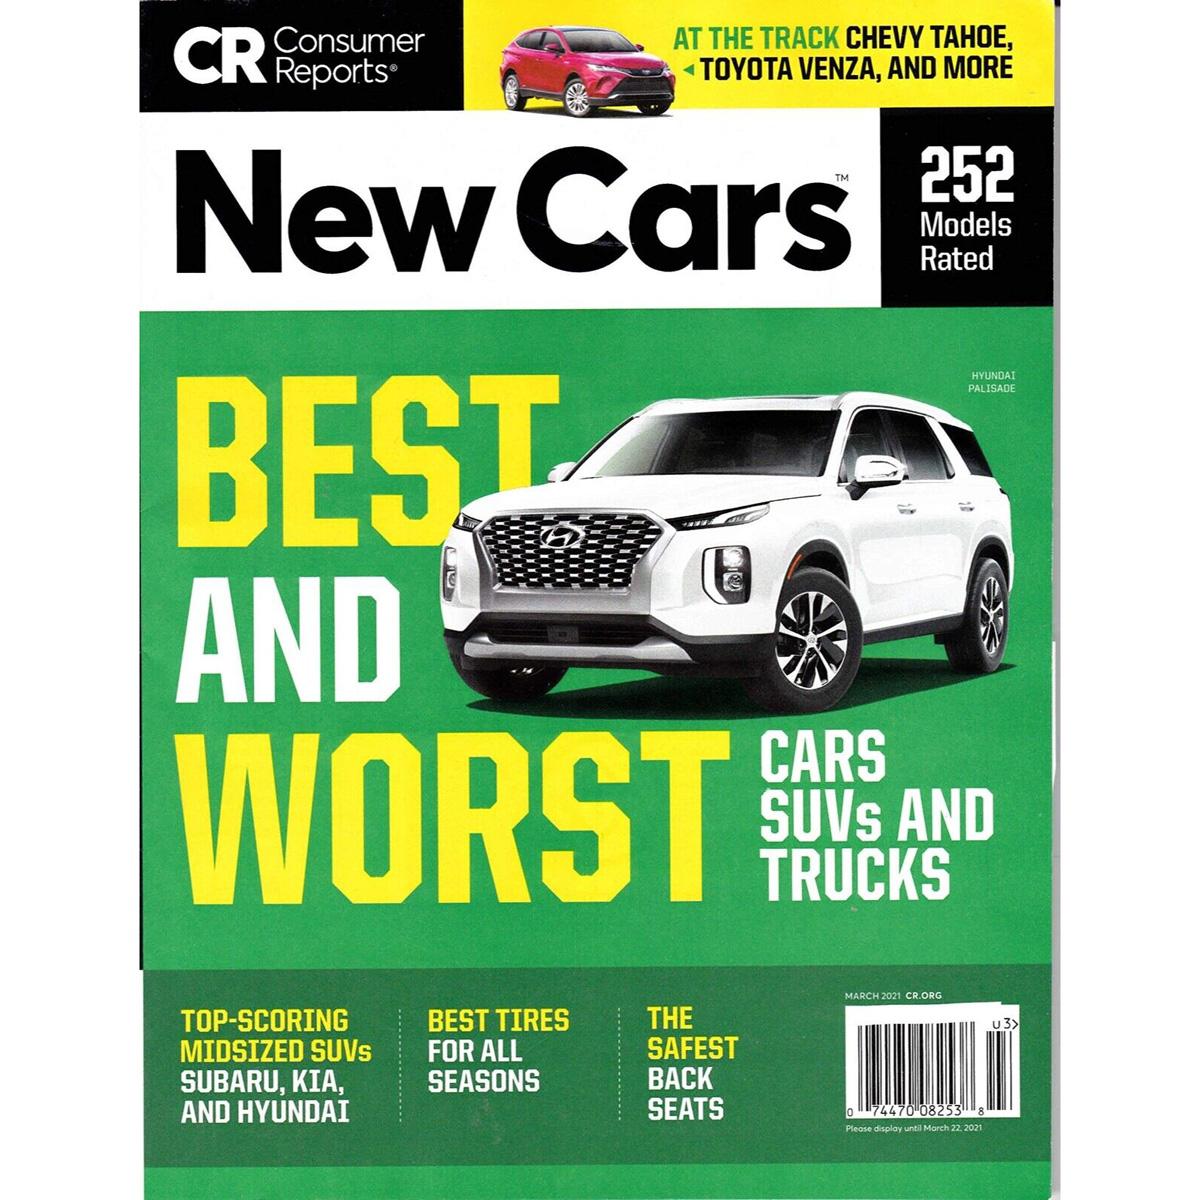 Consumer Reports Magazine Subscription for $15.95